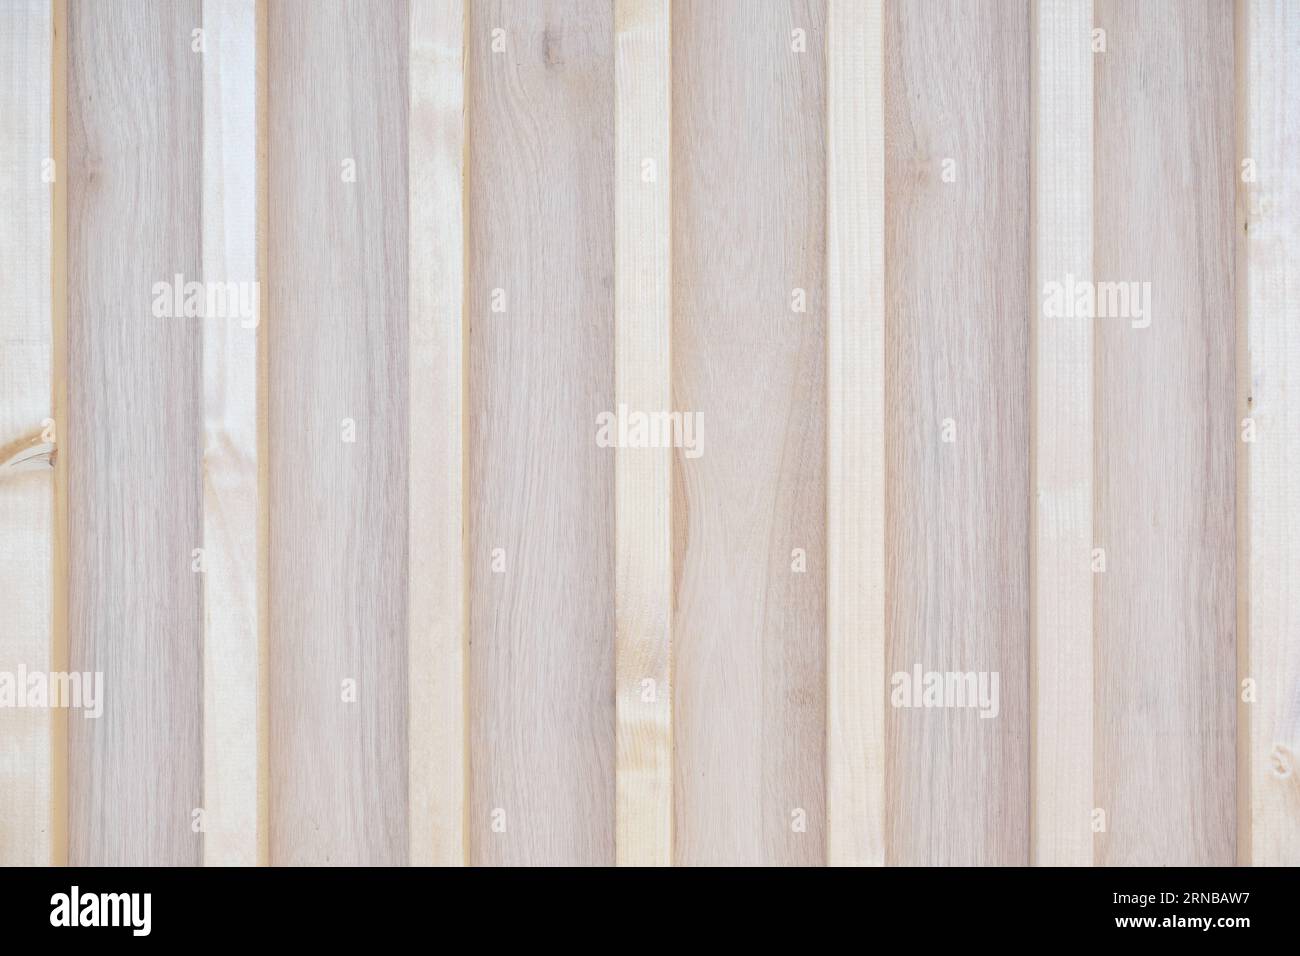 wooden background with vertical wood slat paneling Stock Photo